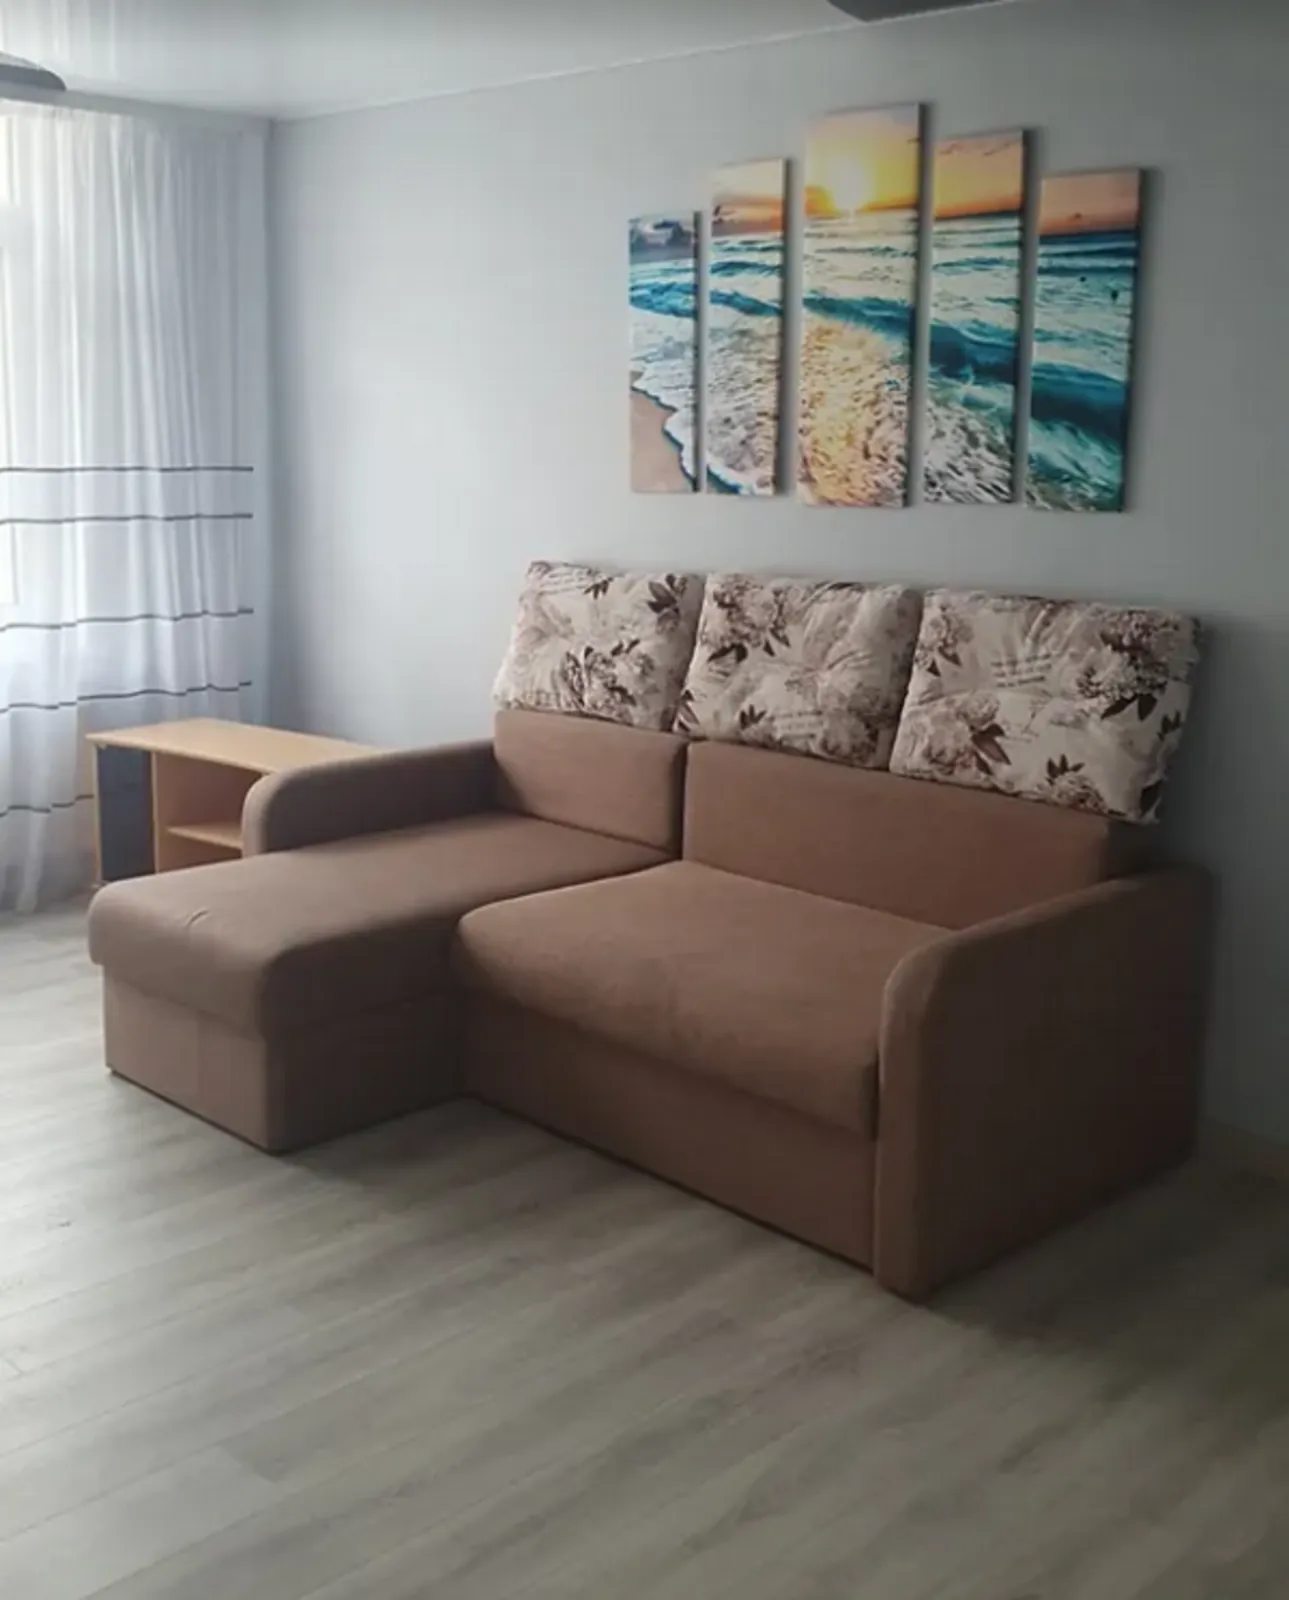 Apartment for rent. 3 rooms, 80 m², 7th floor/10 floors. Bam, Ternopil. 